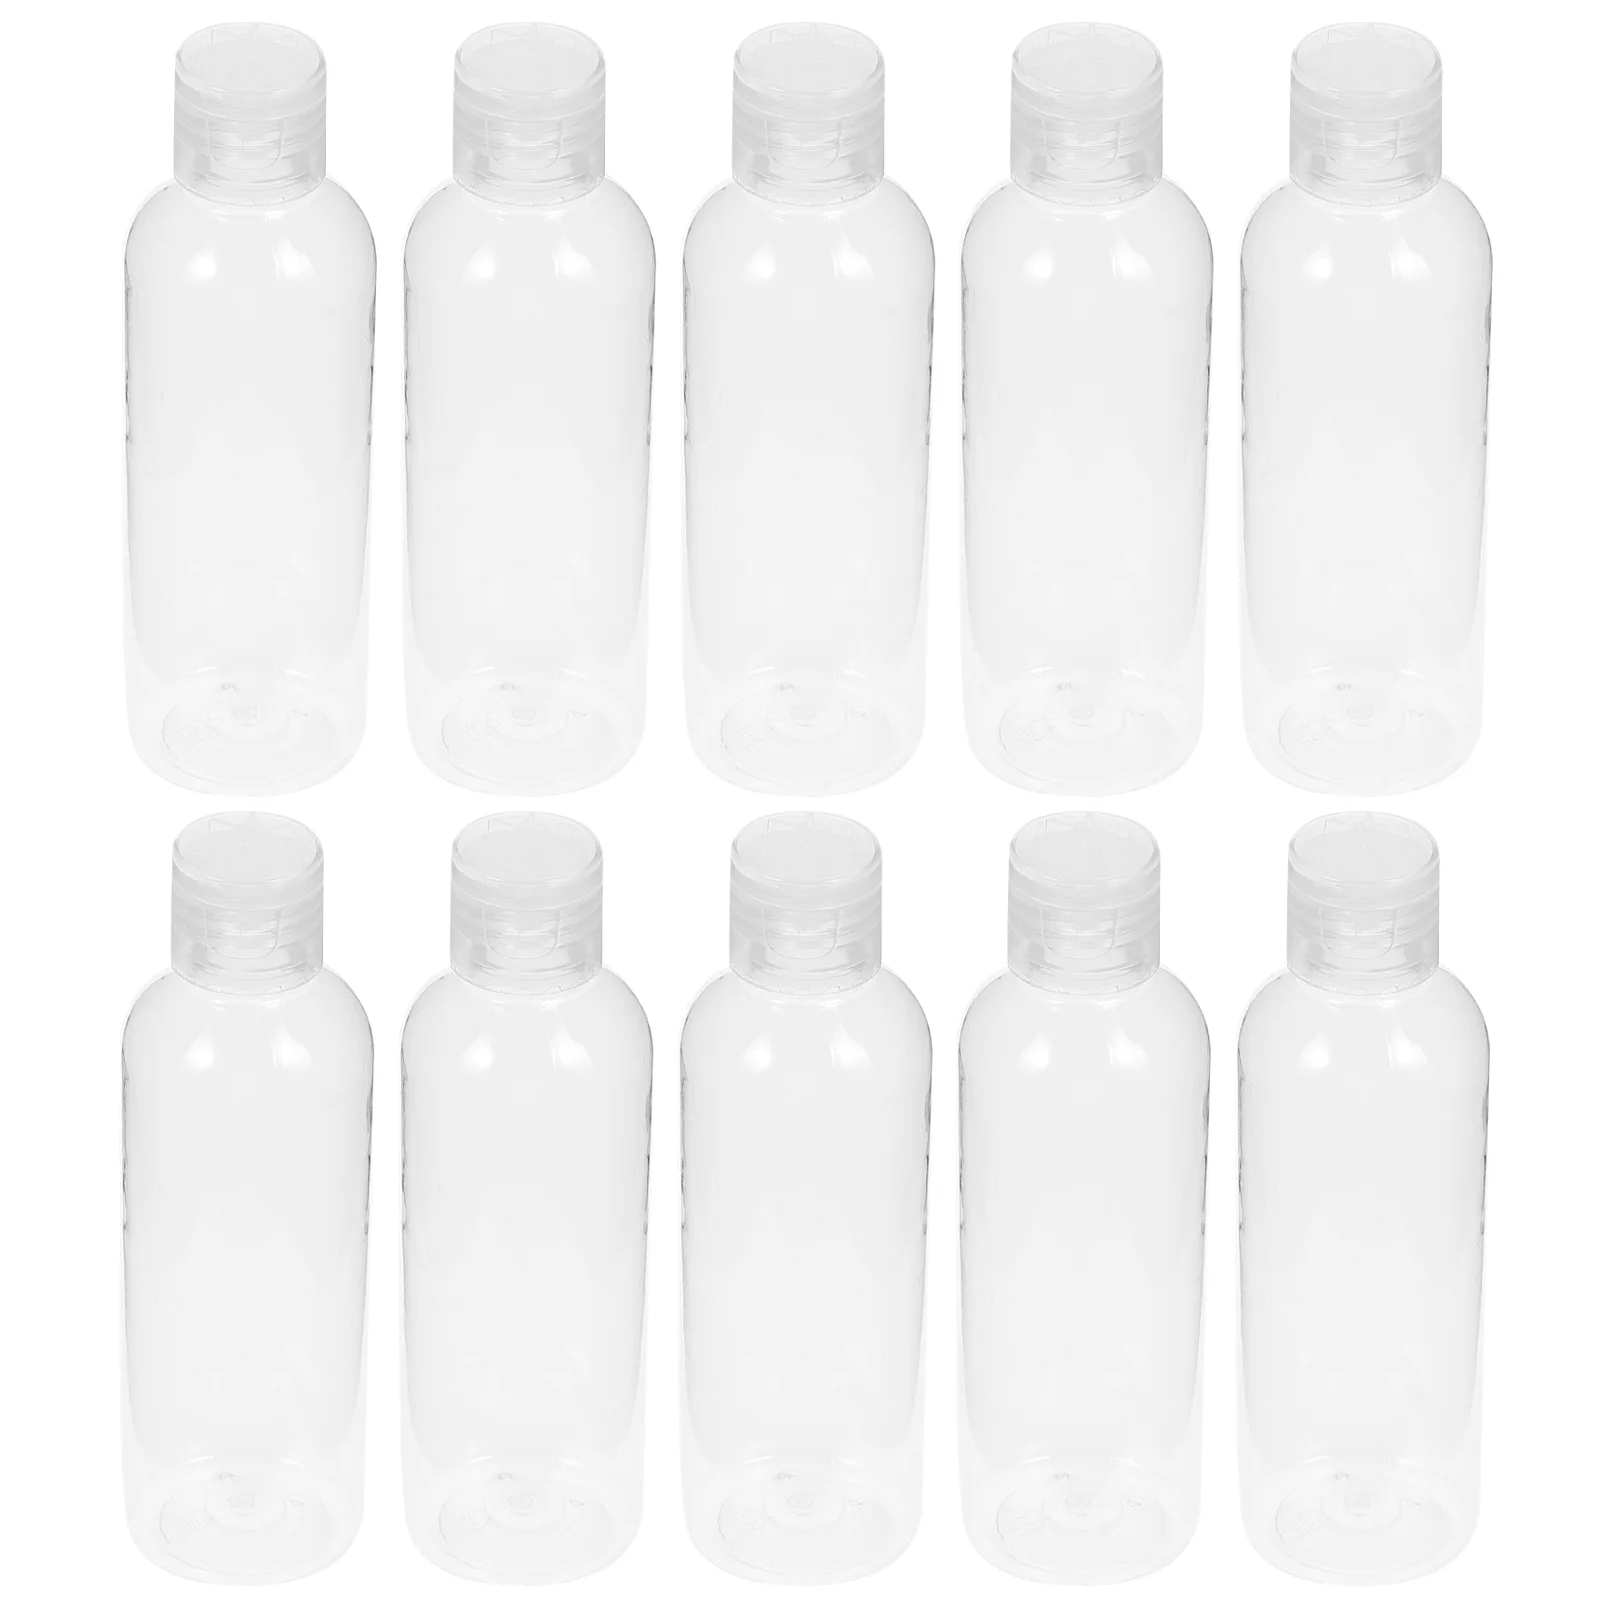 

10 Pcs Squeeze Bottle Toiletry Bottles Containers Travel Toiletries Plastic Clear Shampoo Conditioner Size